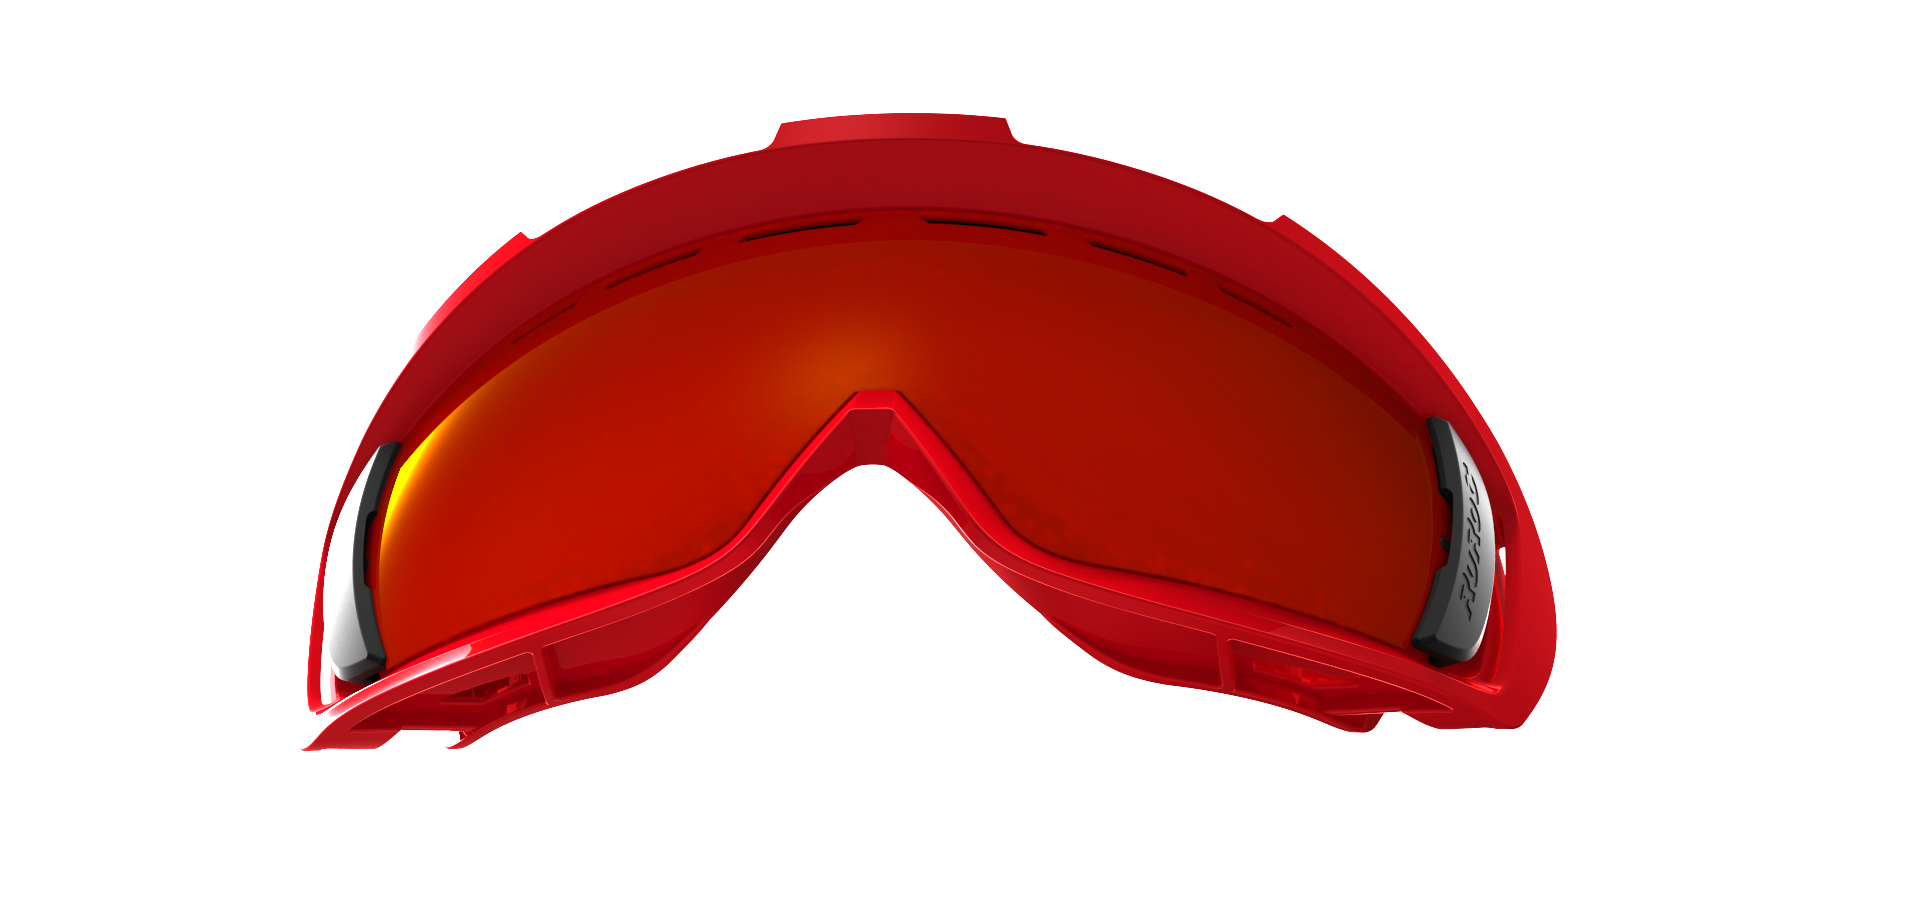 Design Product Goggles Sunglasses Free Frame Clipart